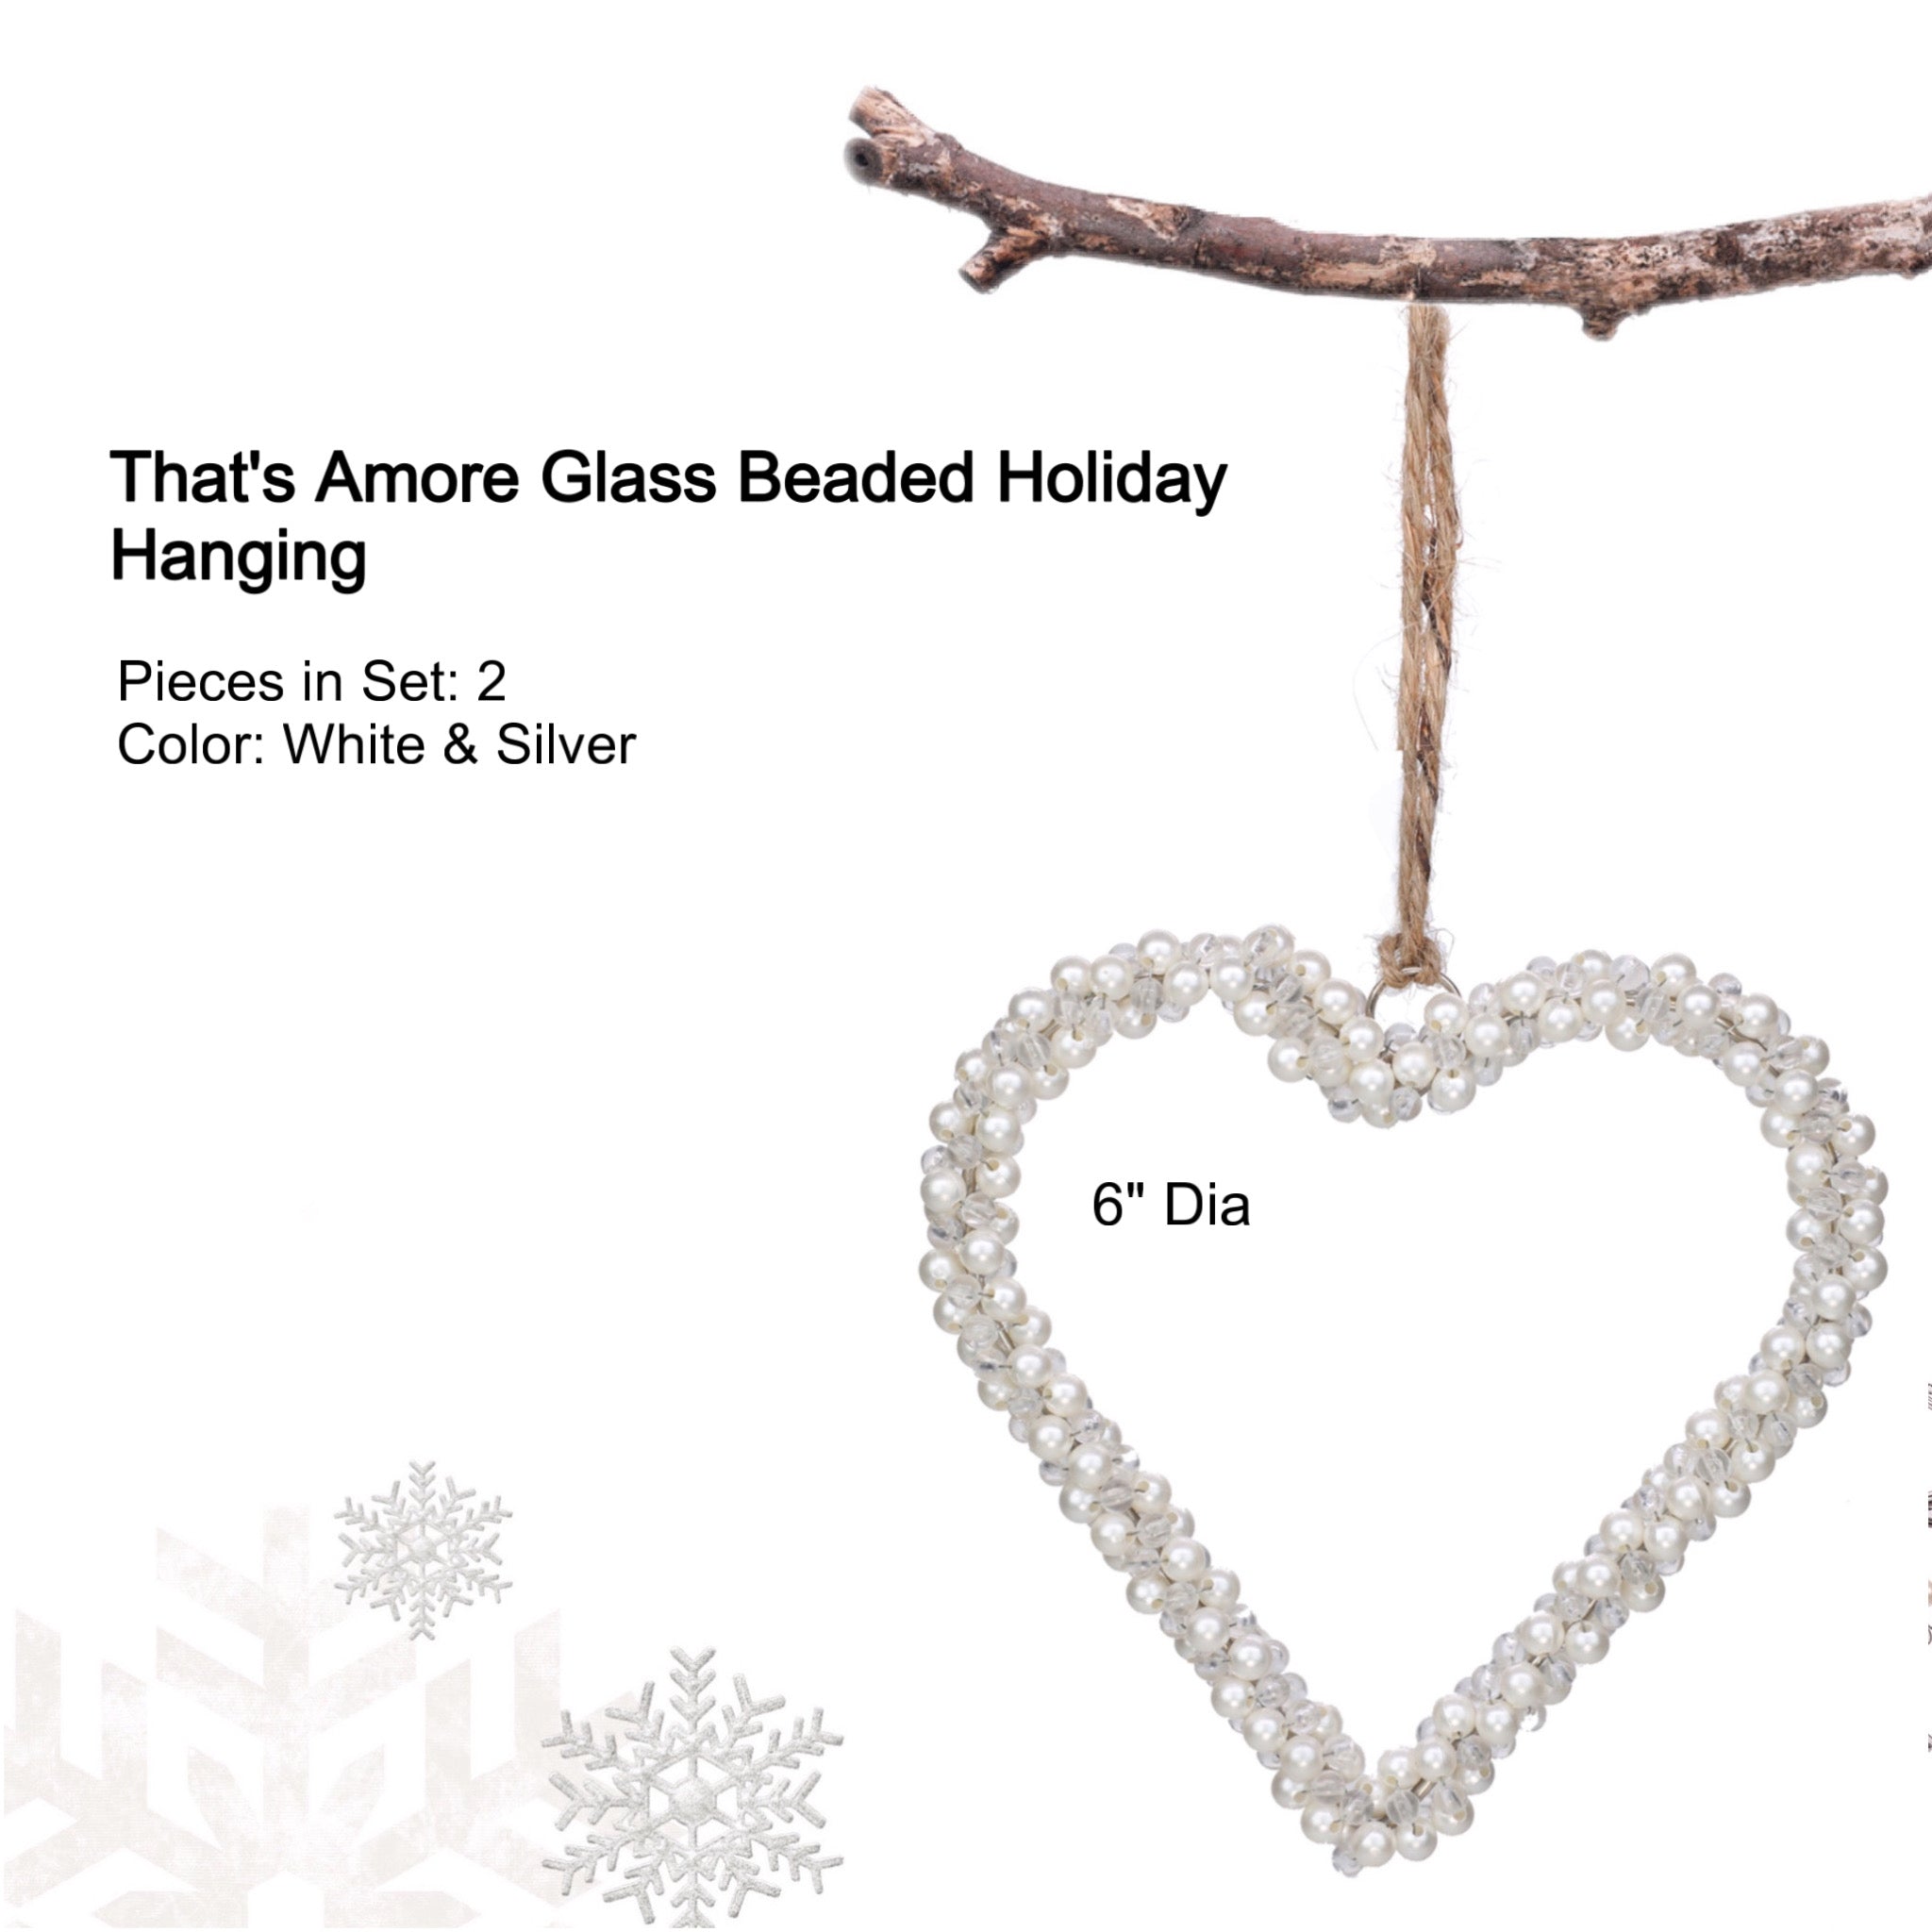 That's Amore Glass Beaded Holiday Hanging in White & Silver, Set of 2